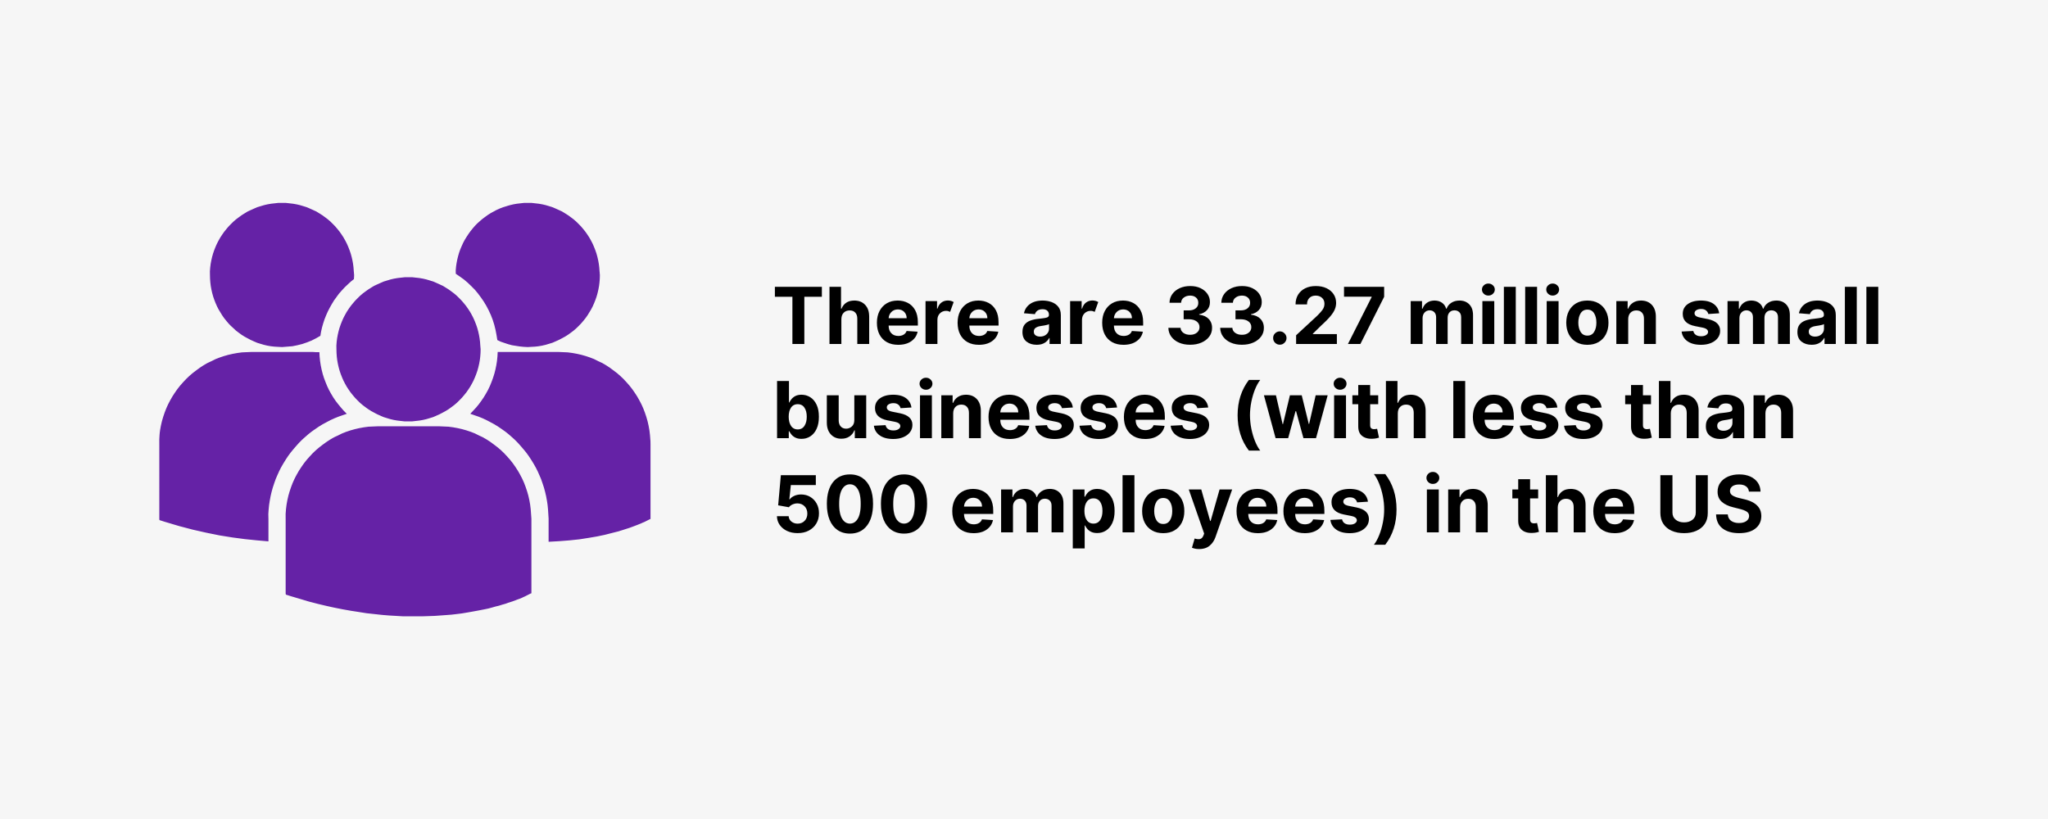 small-businesses-numbers-us